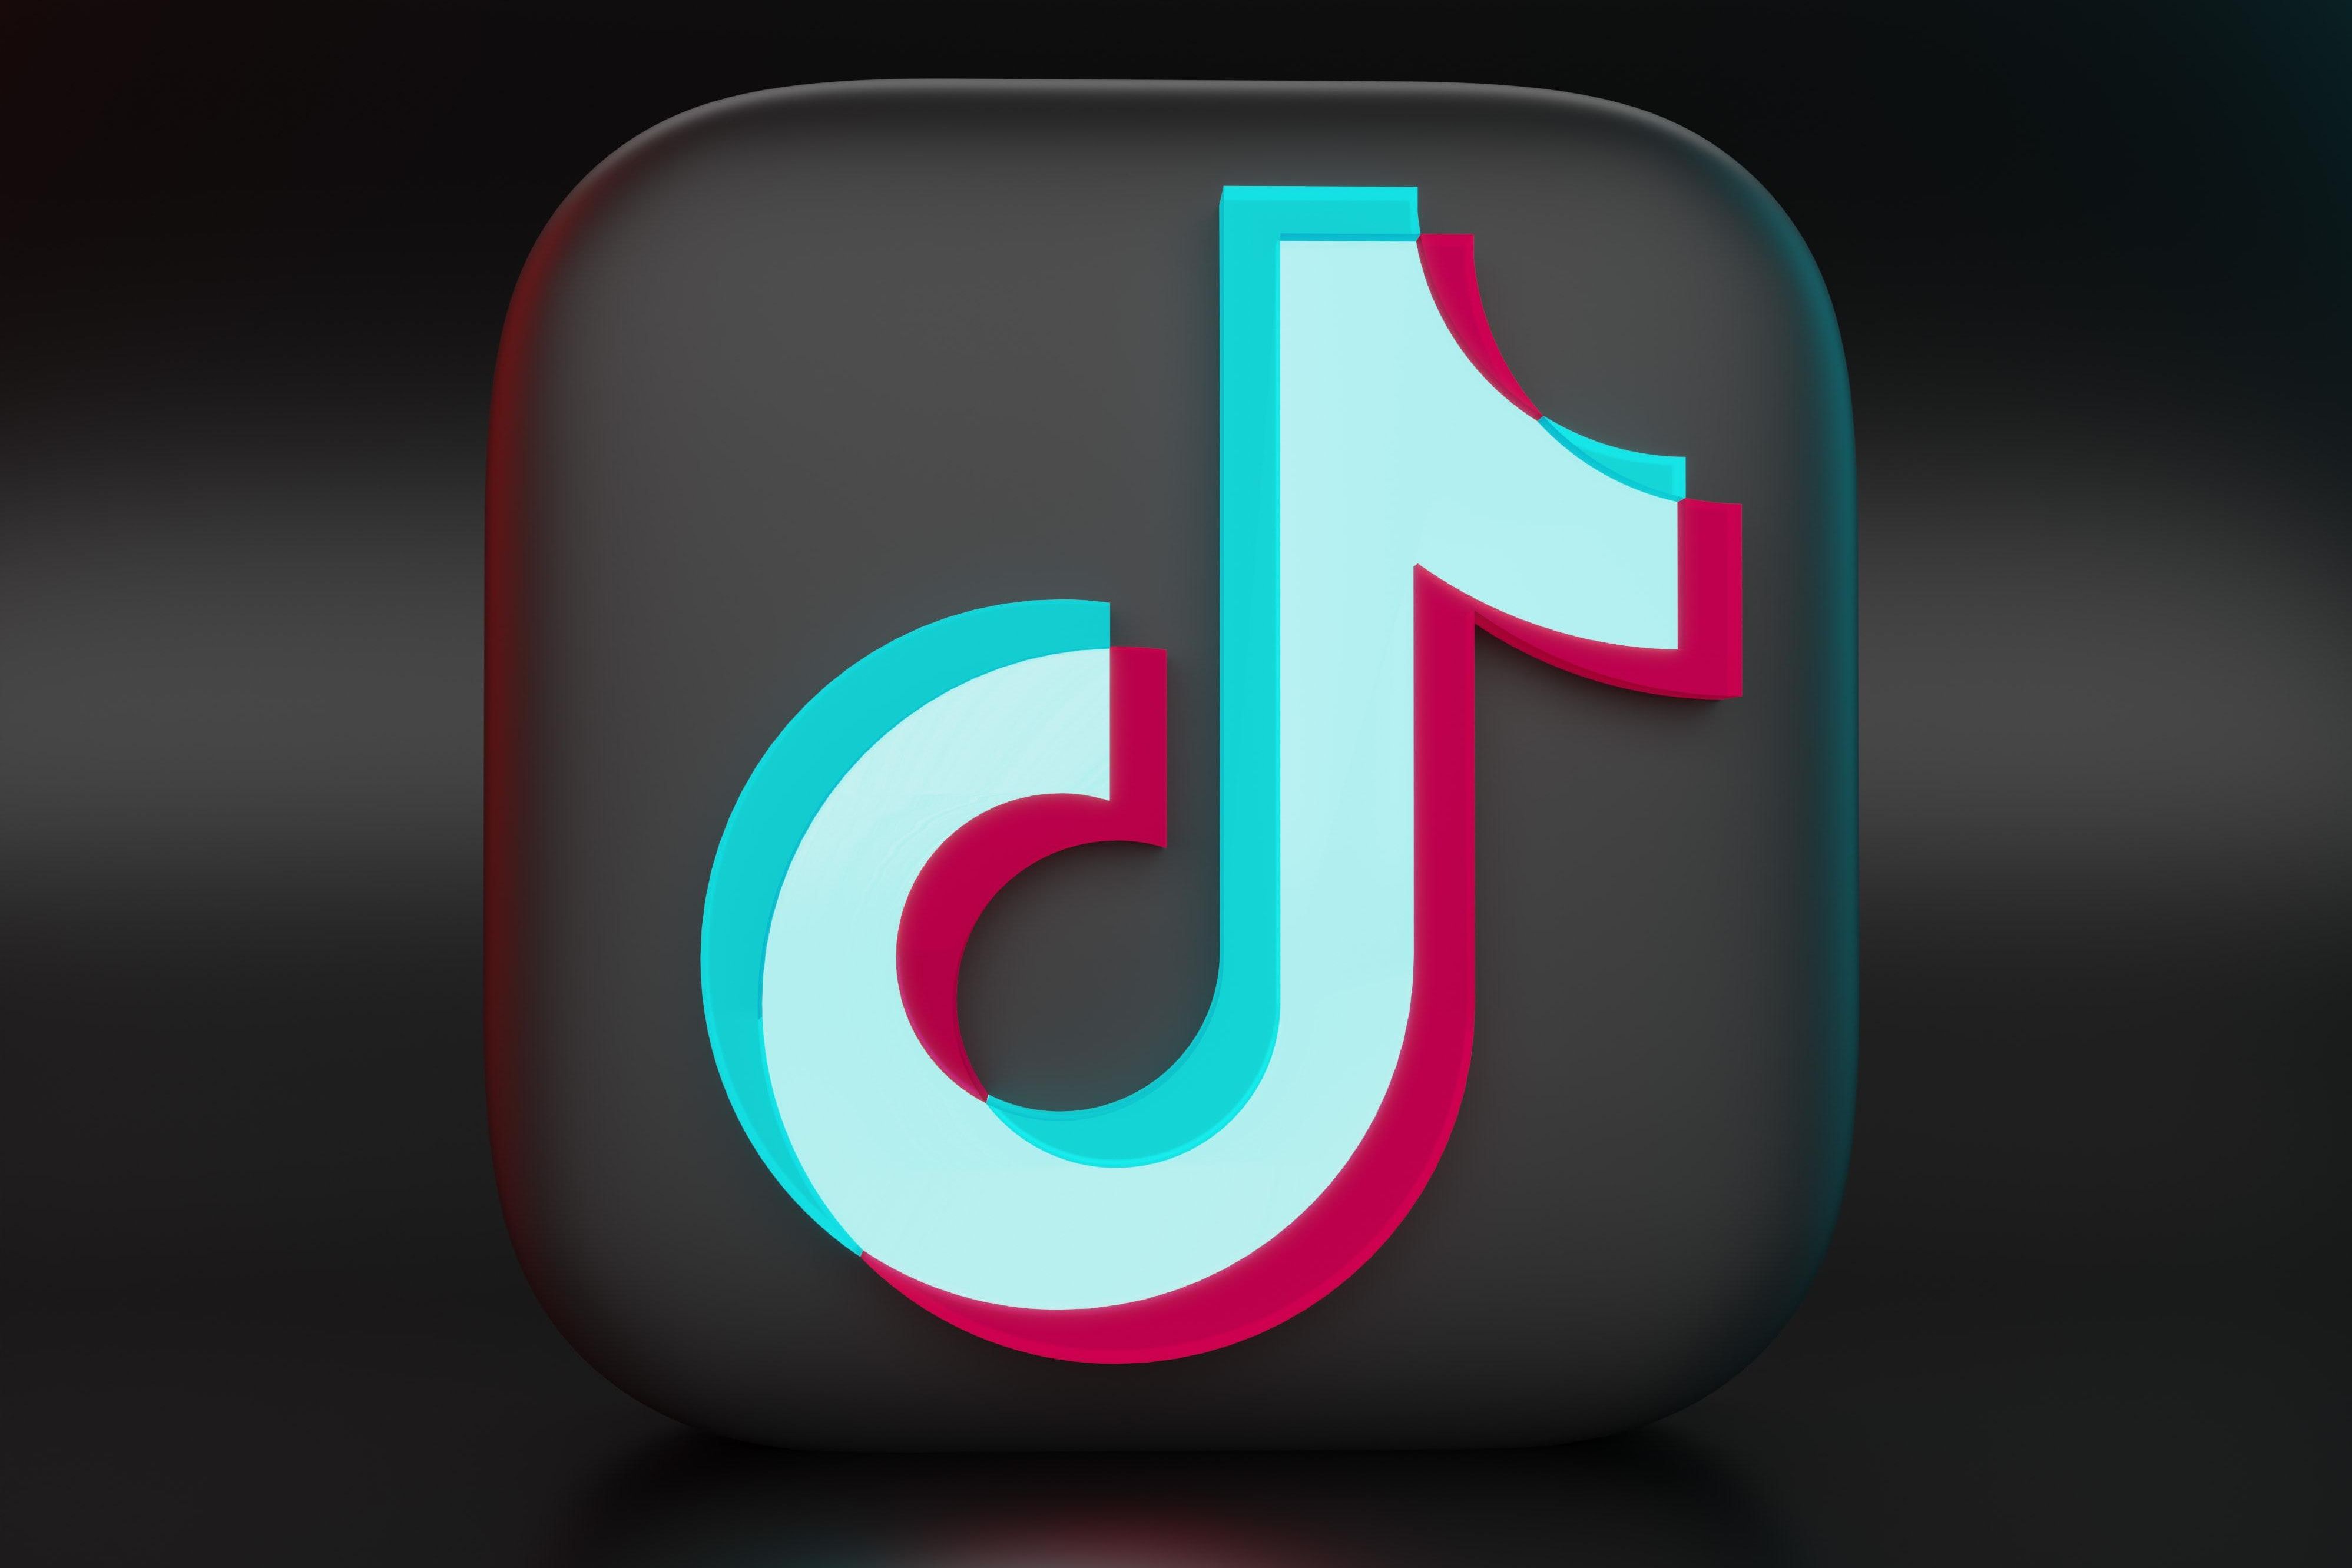 TikTok Will Tell You To Take a Break With New Screen Time Tools